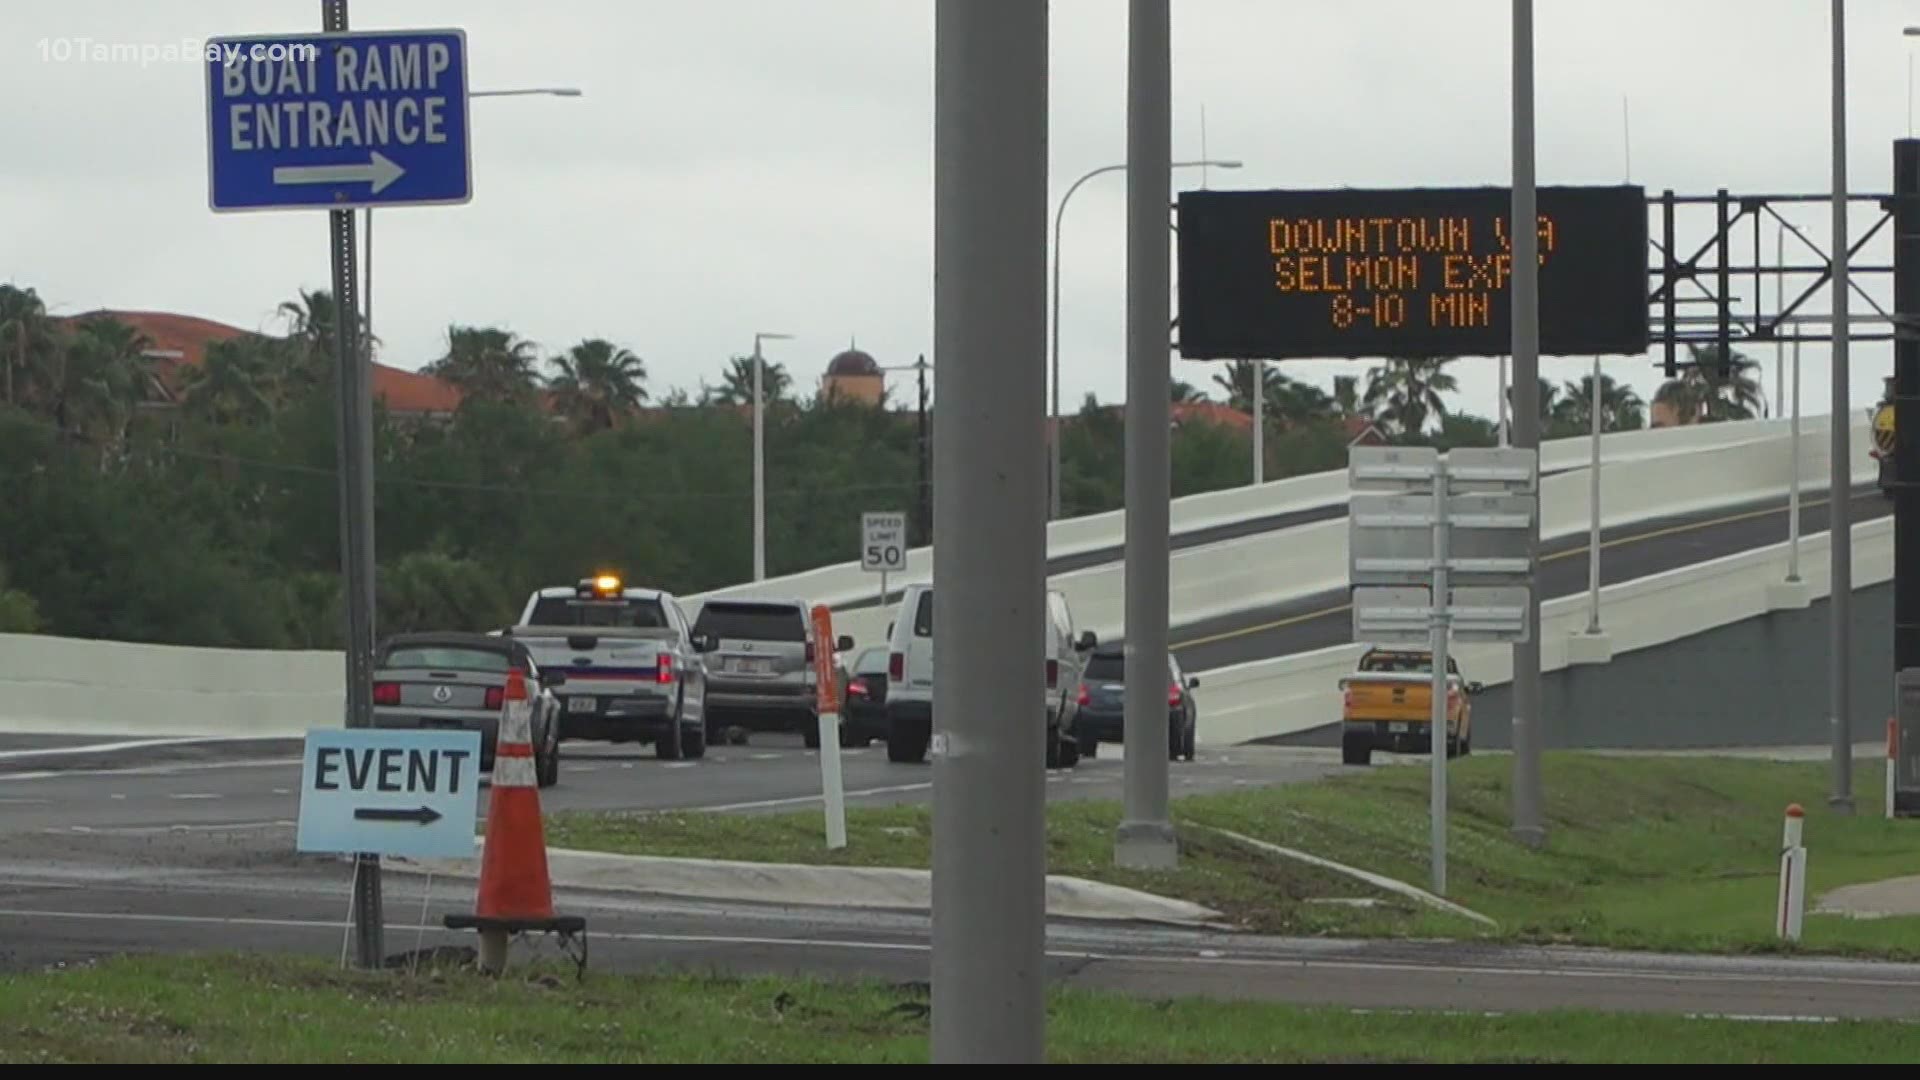 More safety changes could be coming for Tampa Bay area commuters.